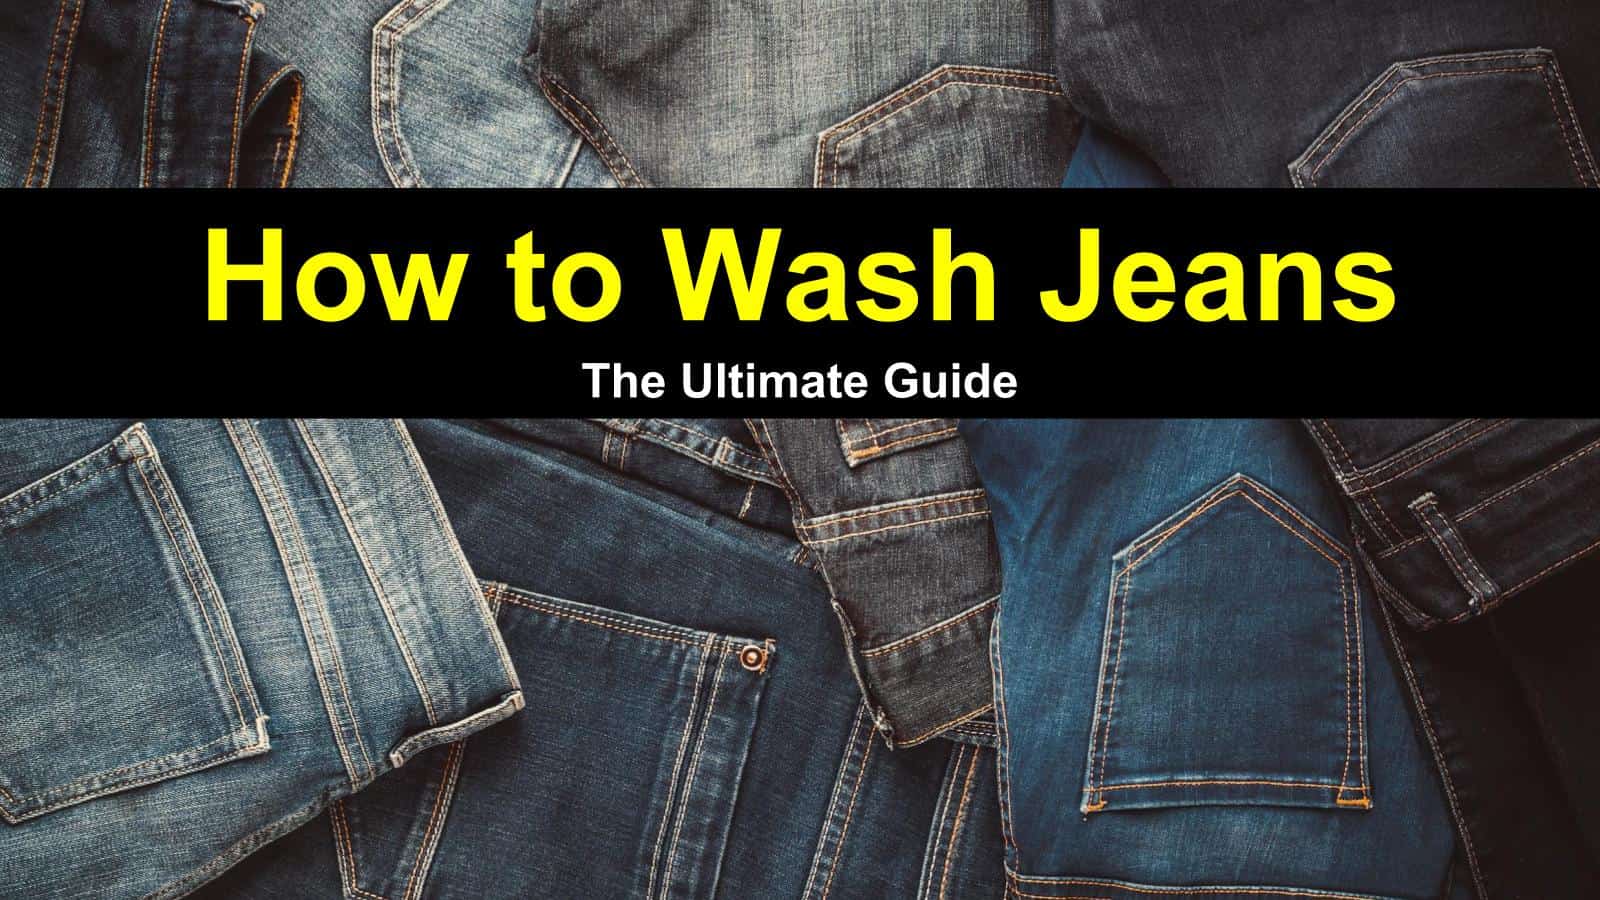 6+ Simple Ways to Wash Jeans